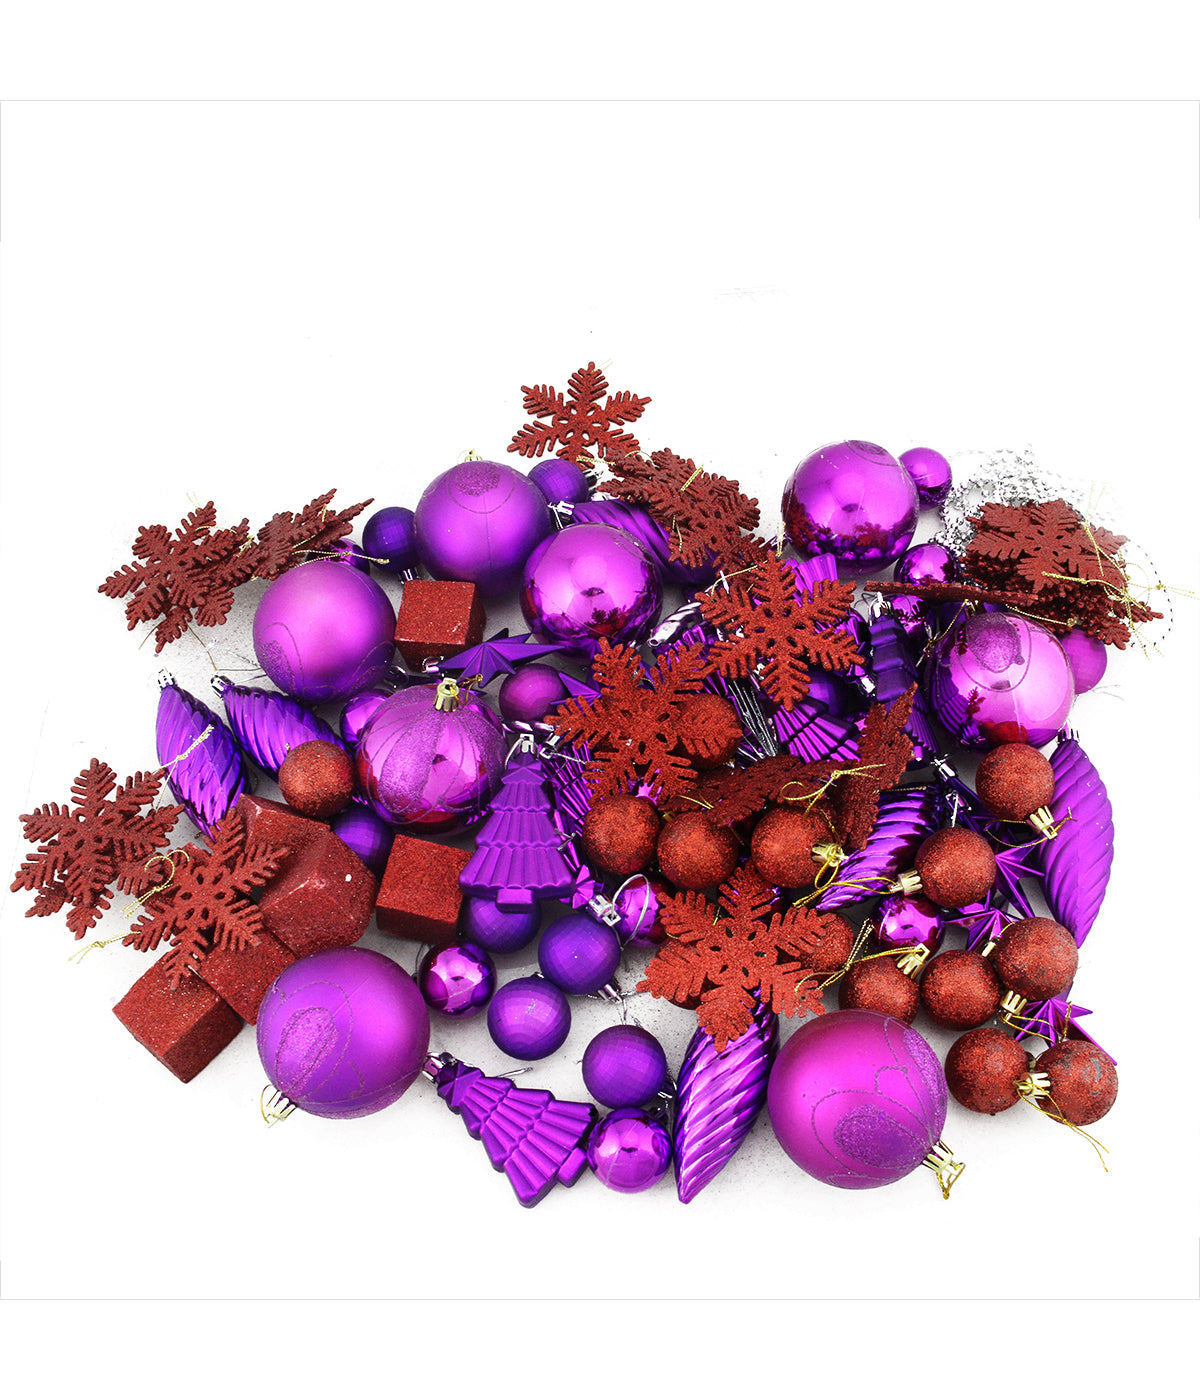 Purple & Red Shatterproof Christmas Ornaments, 125 Count, 5.5"